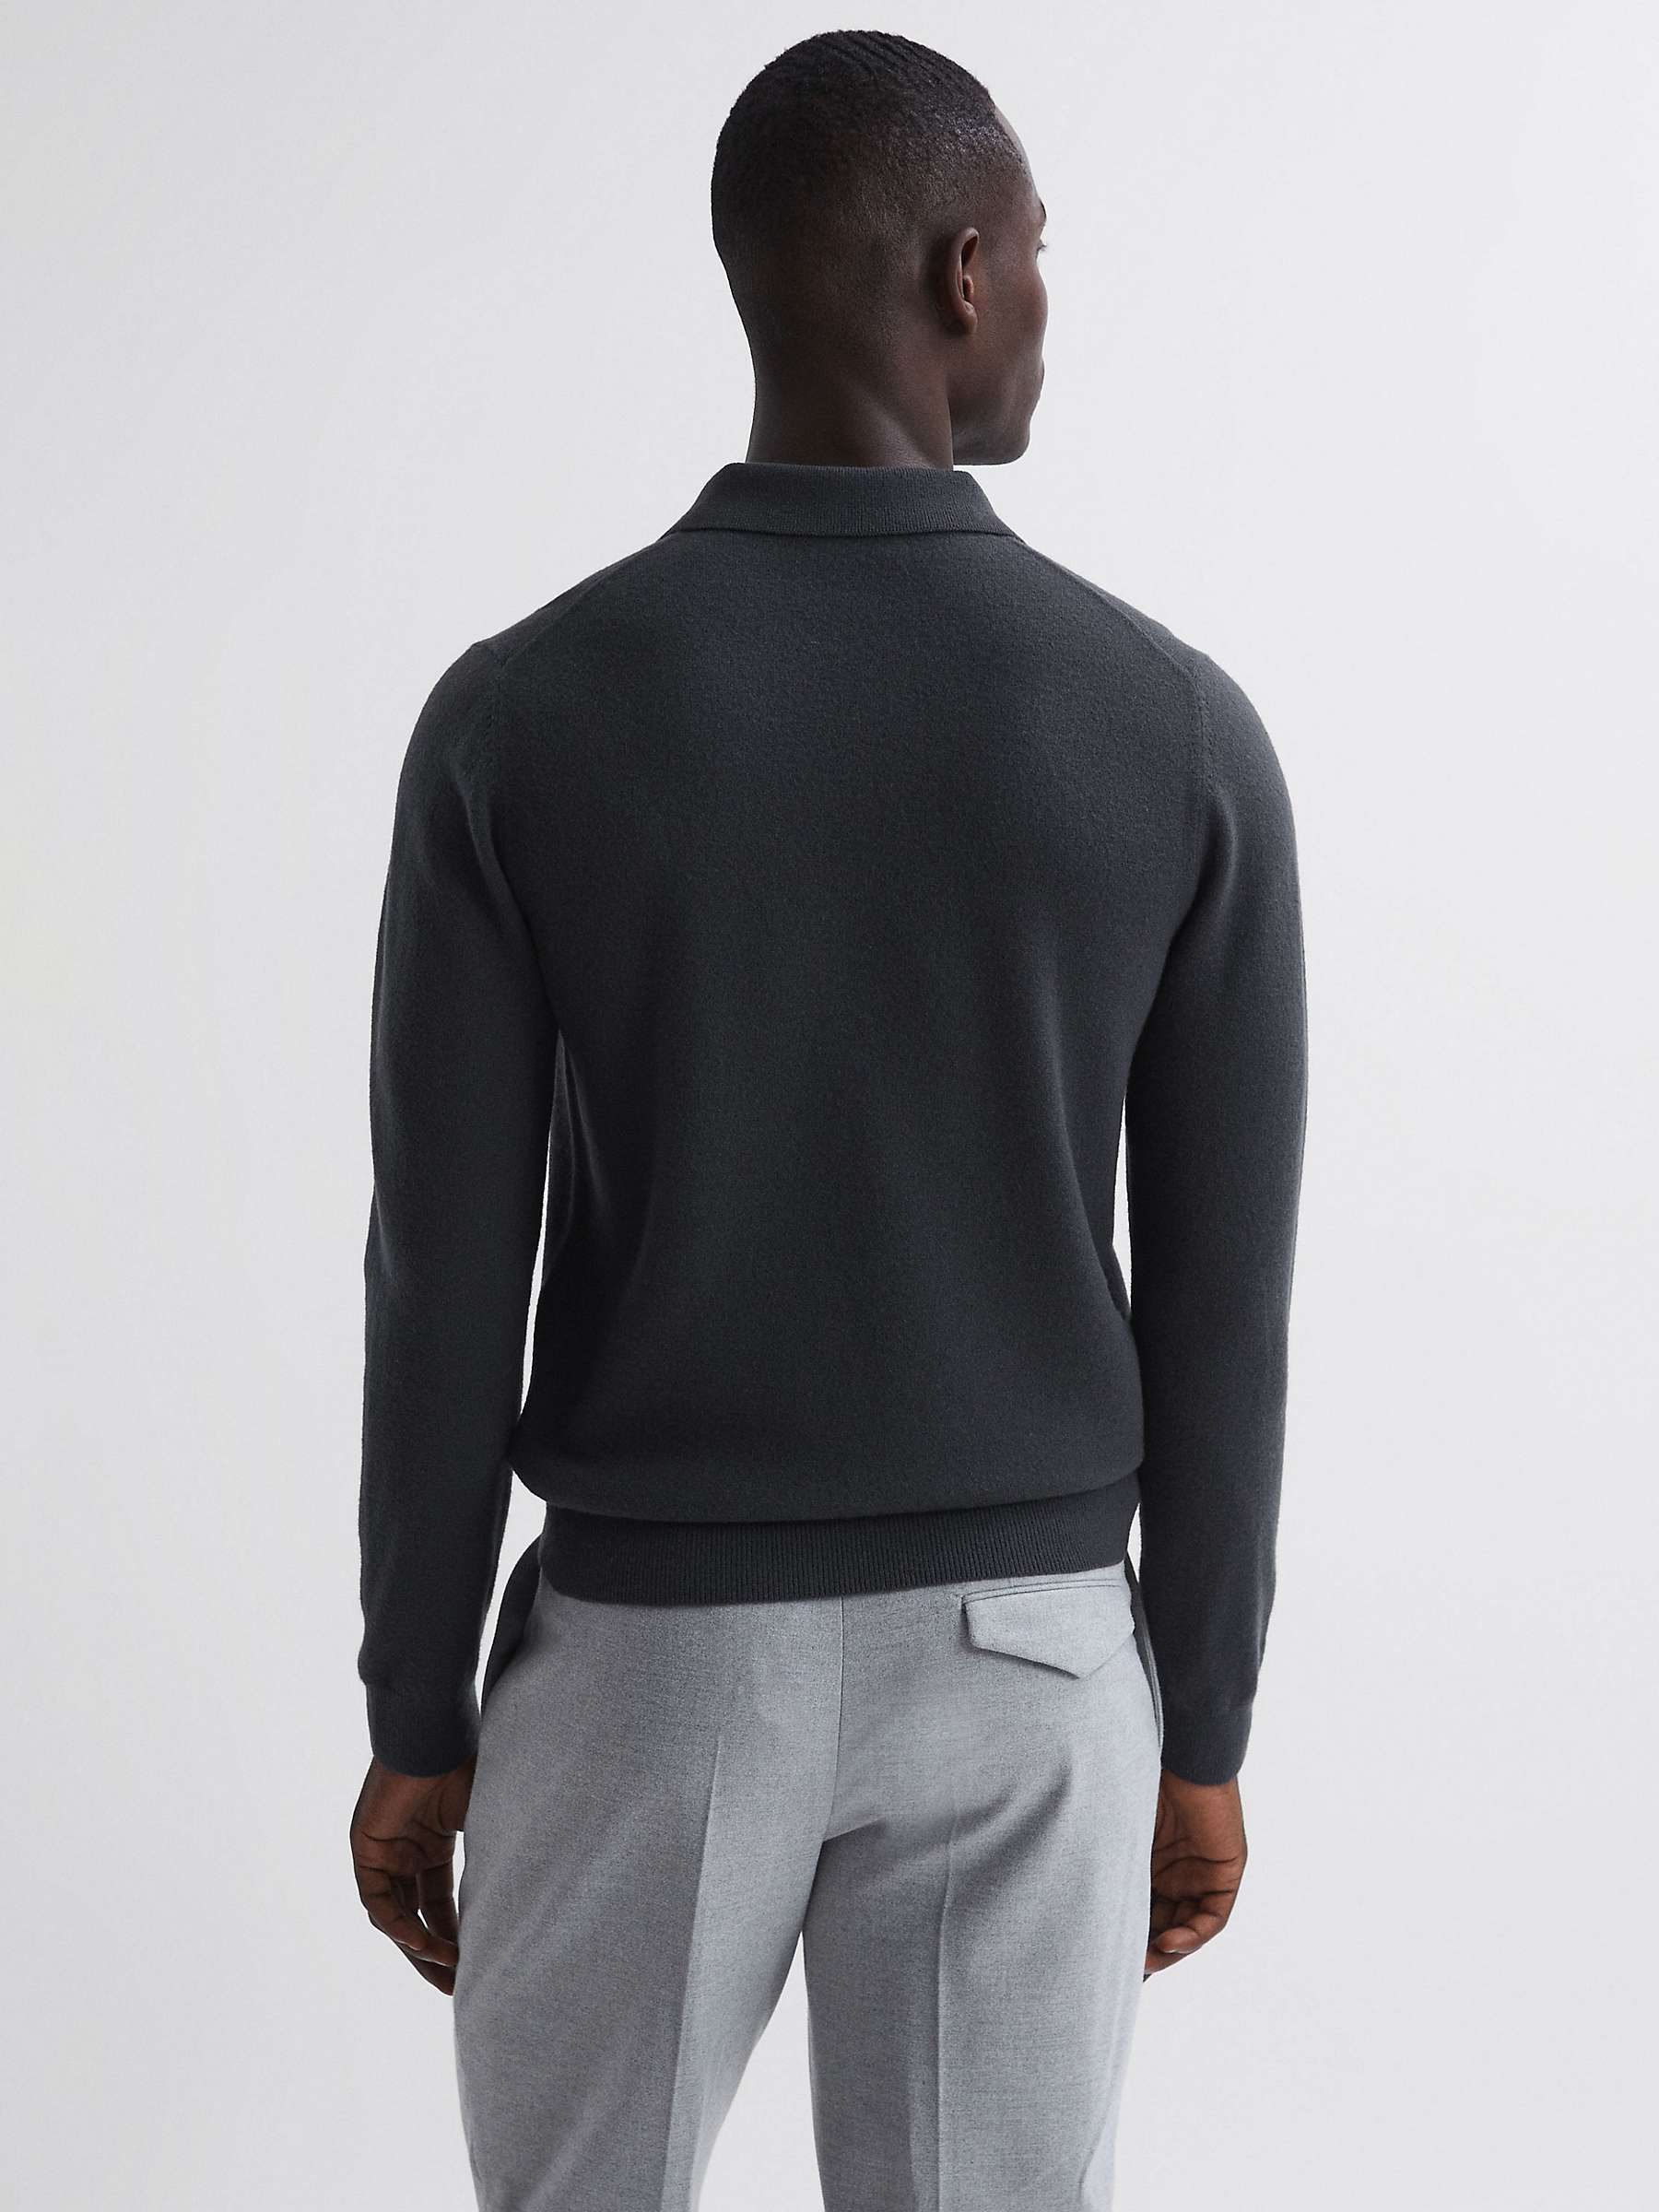 Reiss Swifts Wool Blend Knit Polo Shirt, Anthracite Grey at John Lewis ...